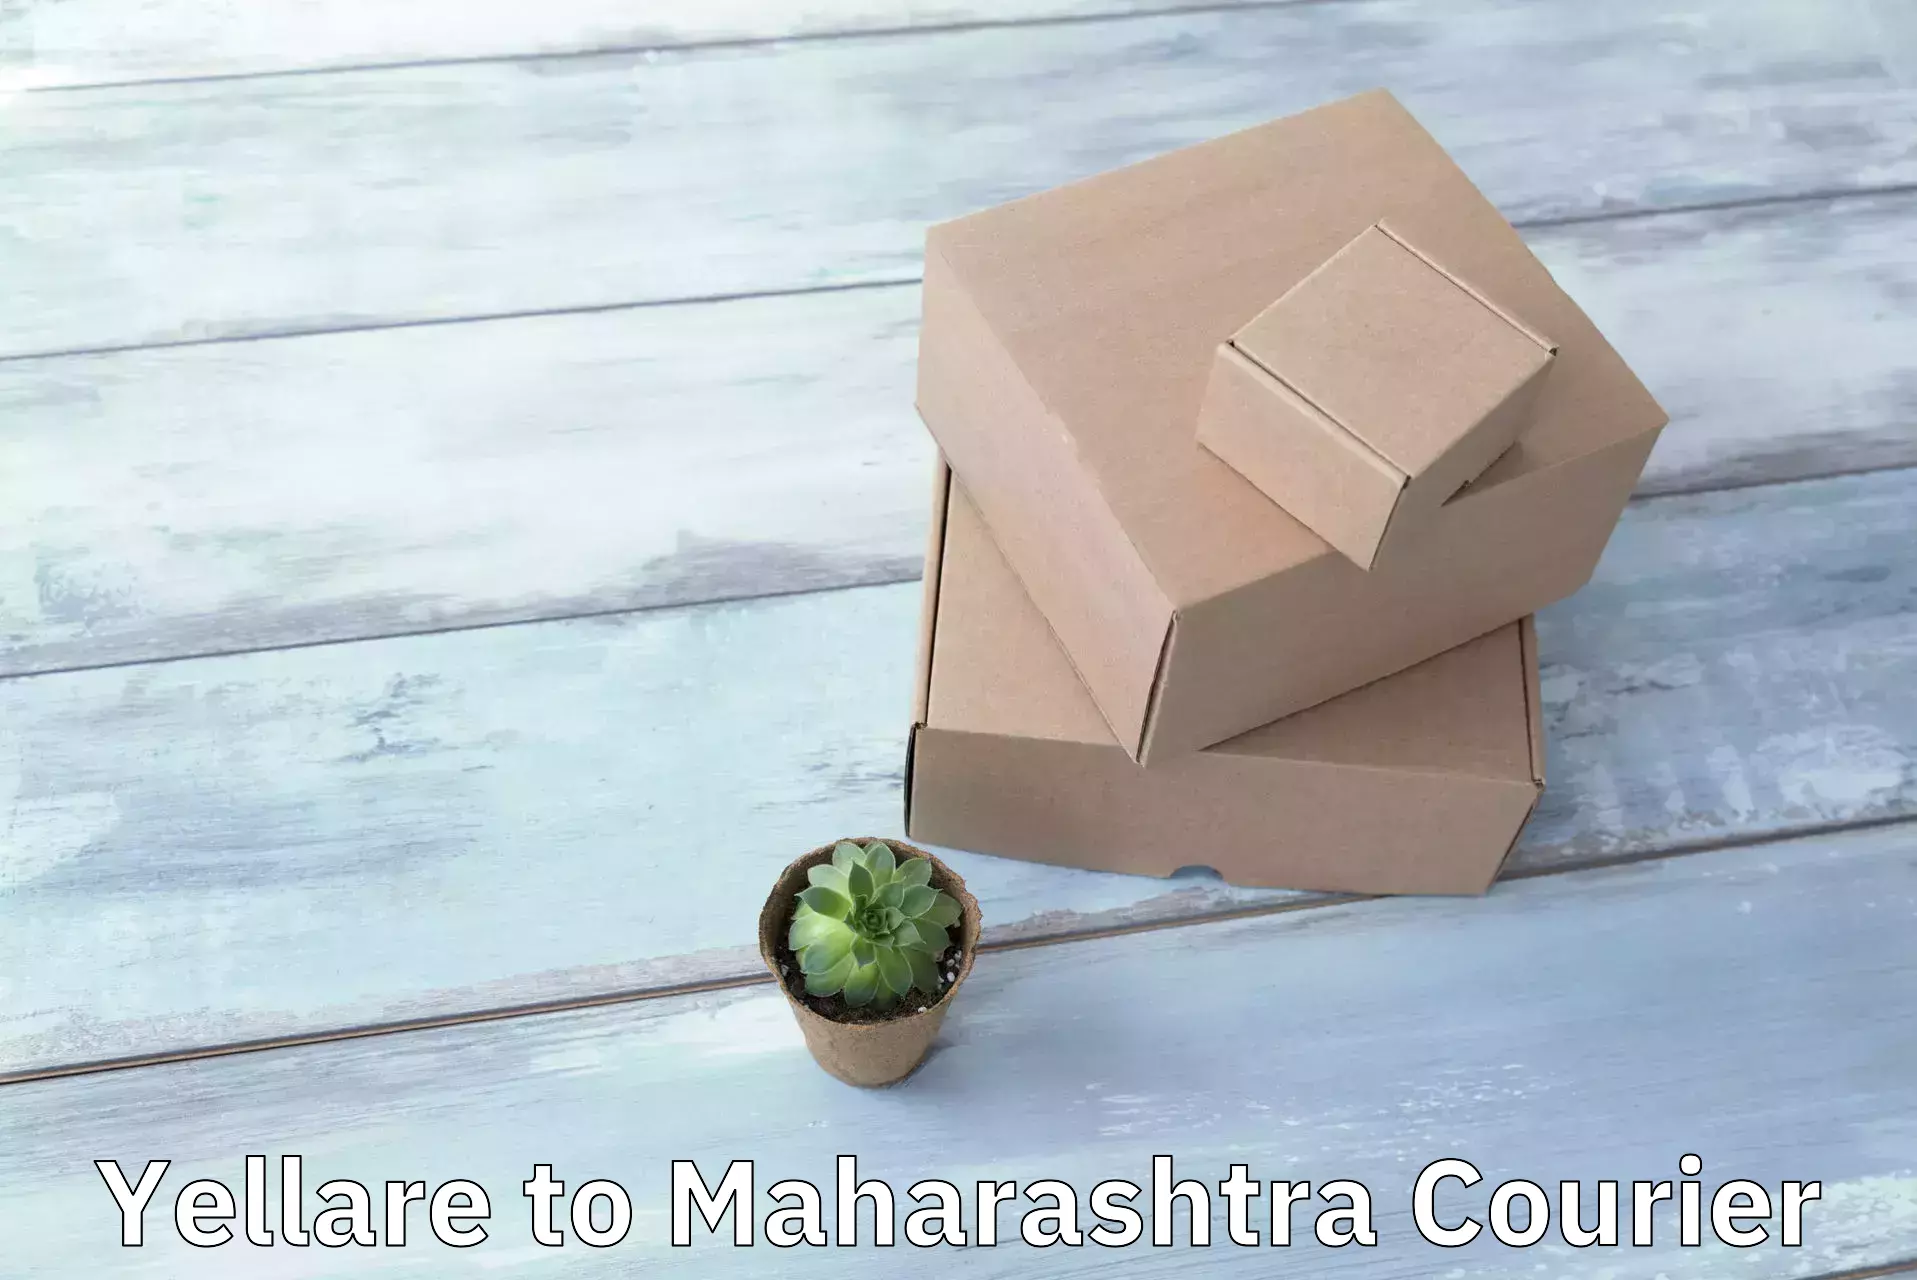 Reliable parcel services in Yellare to Gadchiroli